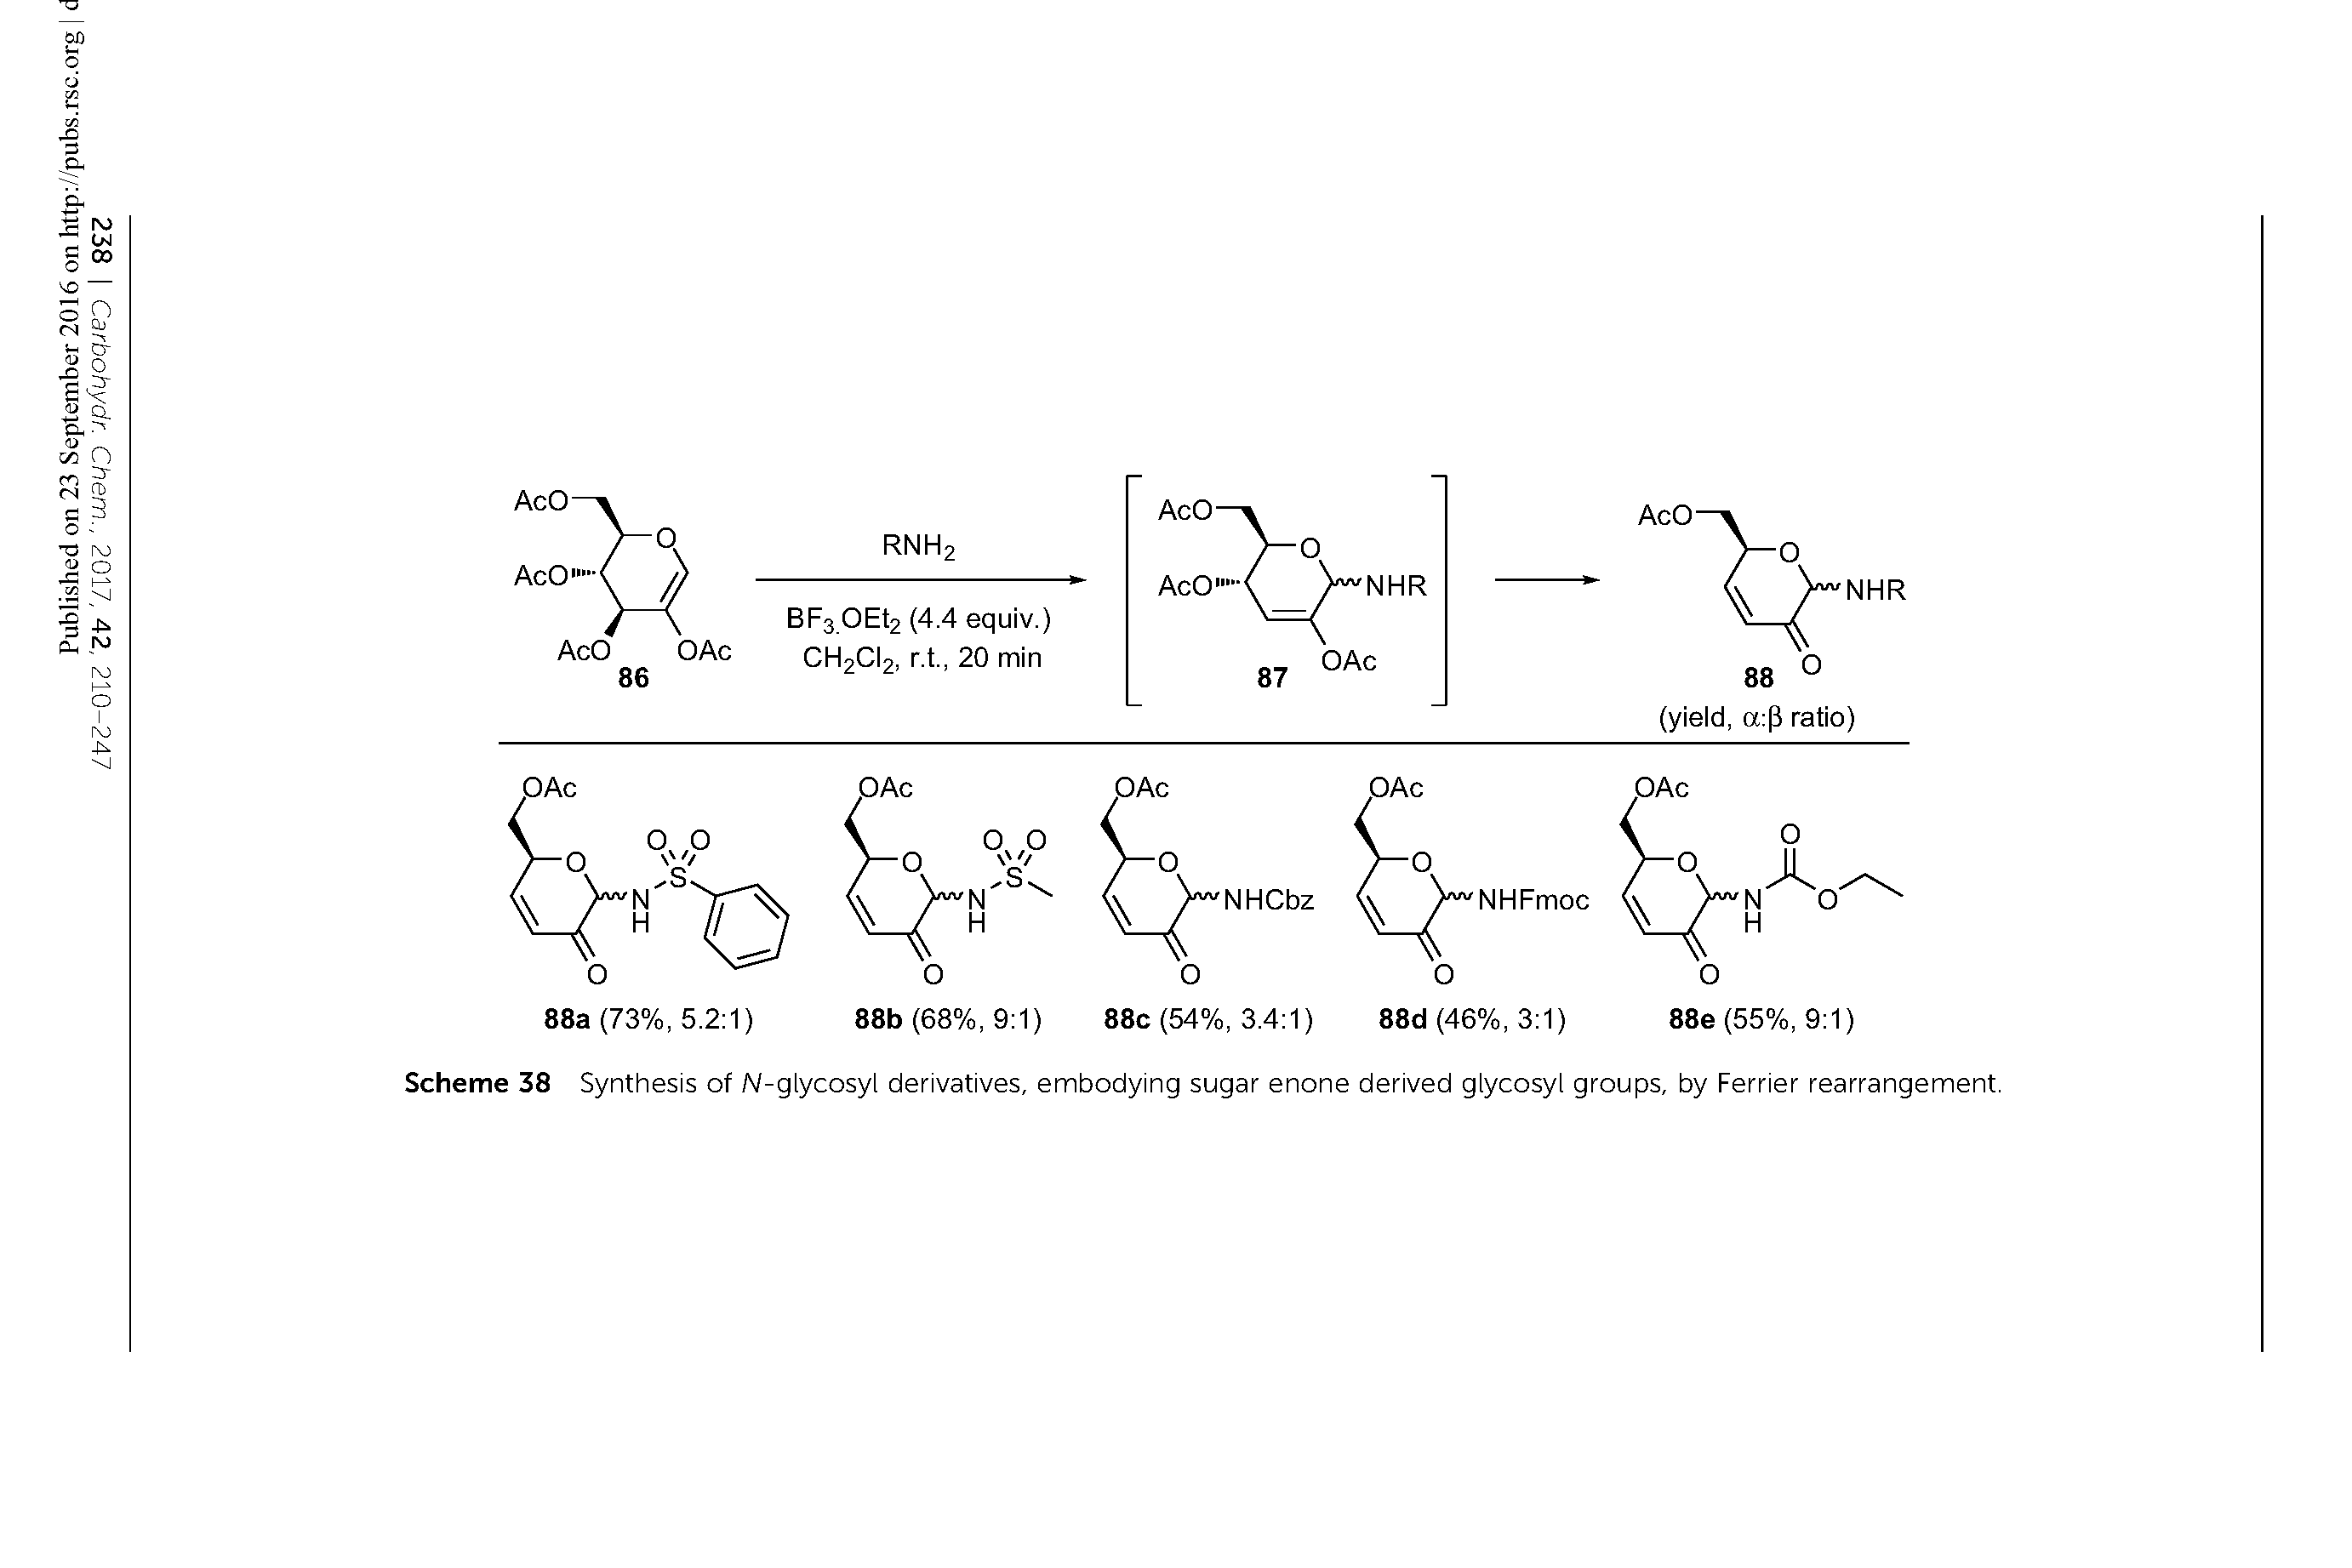 Scheme 38 Synthesis of N-glycosyl derivatives, embodying sugar enone derived giycosyi groups, by Ferrier rearrangement.